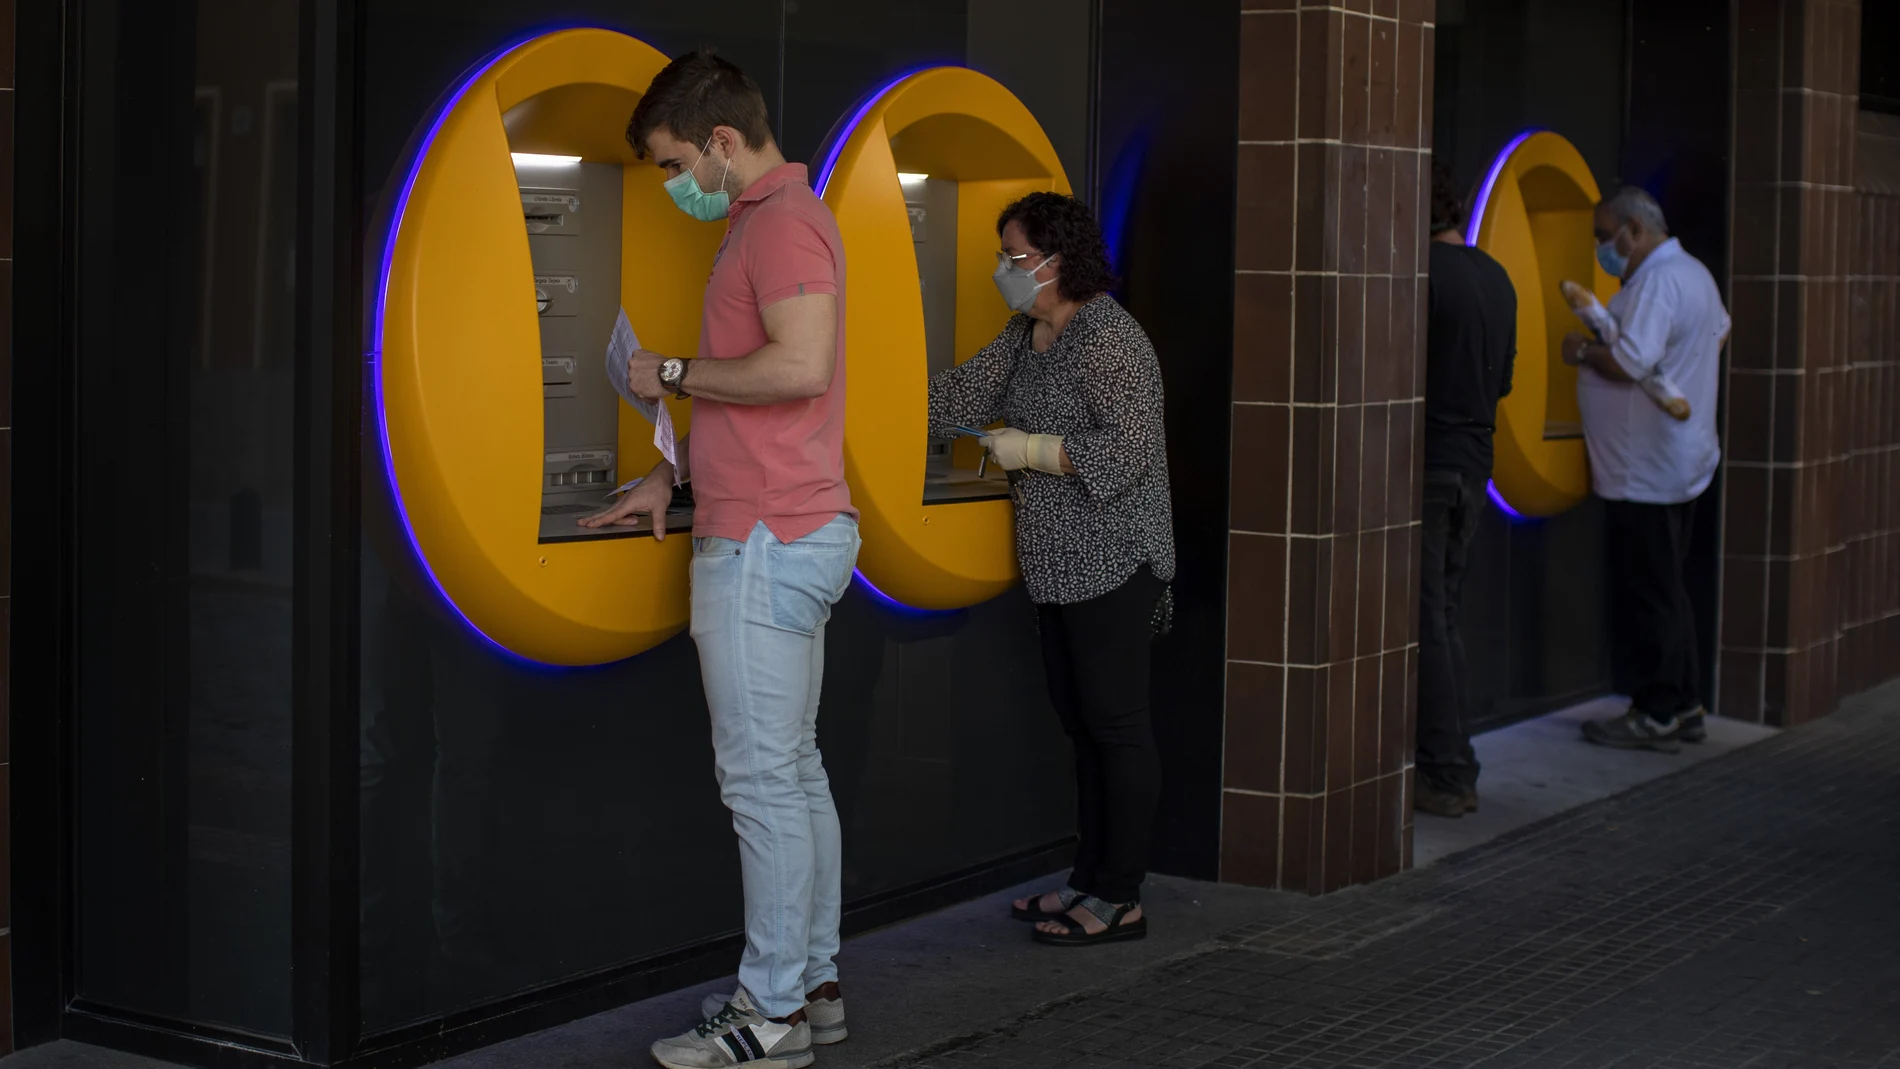 FILE - In this May 5, 2020, file photo, people wearing face masks use cash machines in Caldas de Montbui, near Barcelona, Spain. The coronavirus pandemic has reawakened debate about the continued viability of what has been the physical lifeblood of global economies: paper money and coins. (AP Photo/Emilio Morenatti)